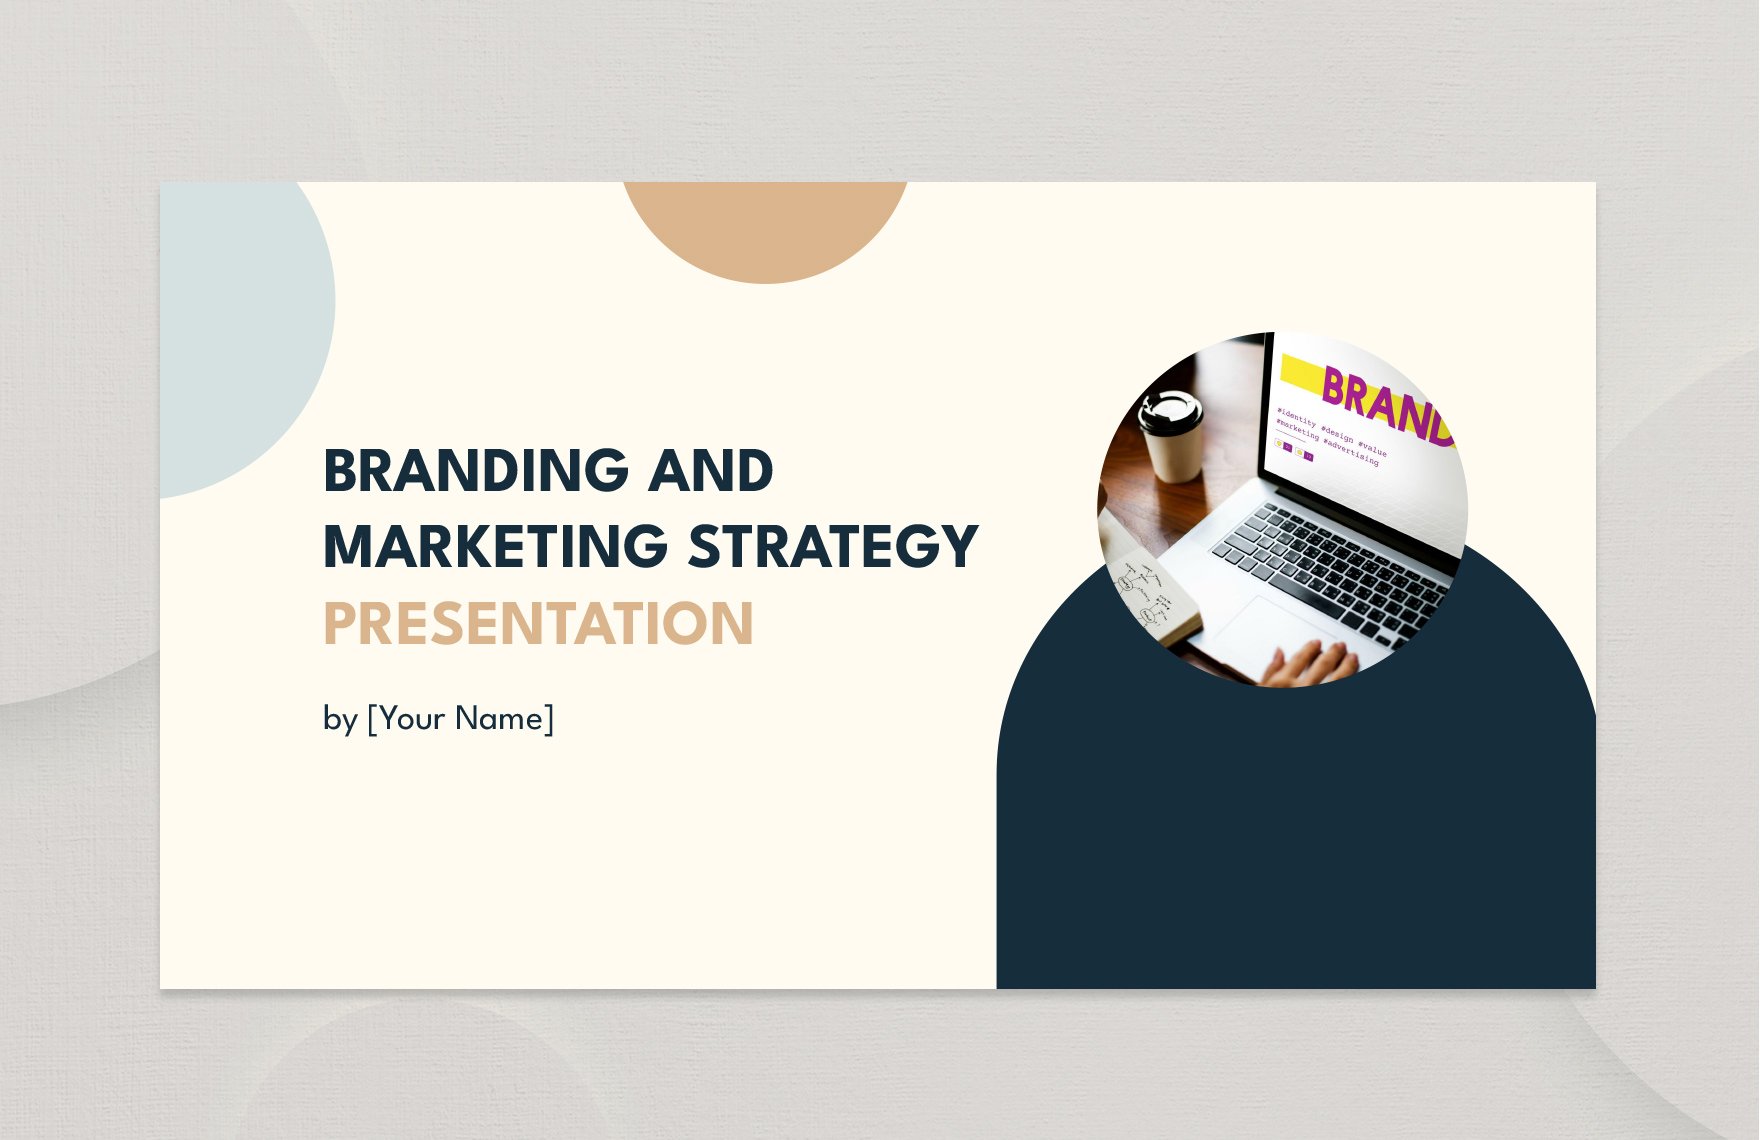 Branding and Marketing Strategy Presentation Template